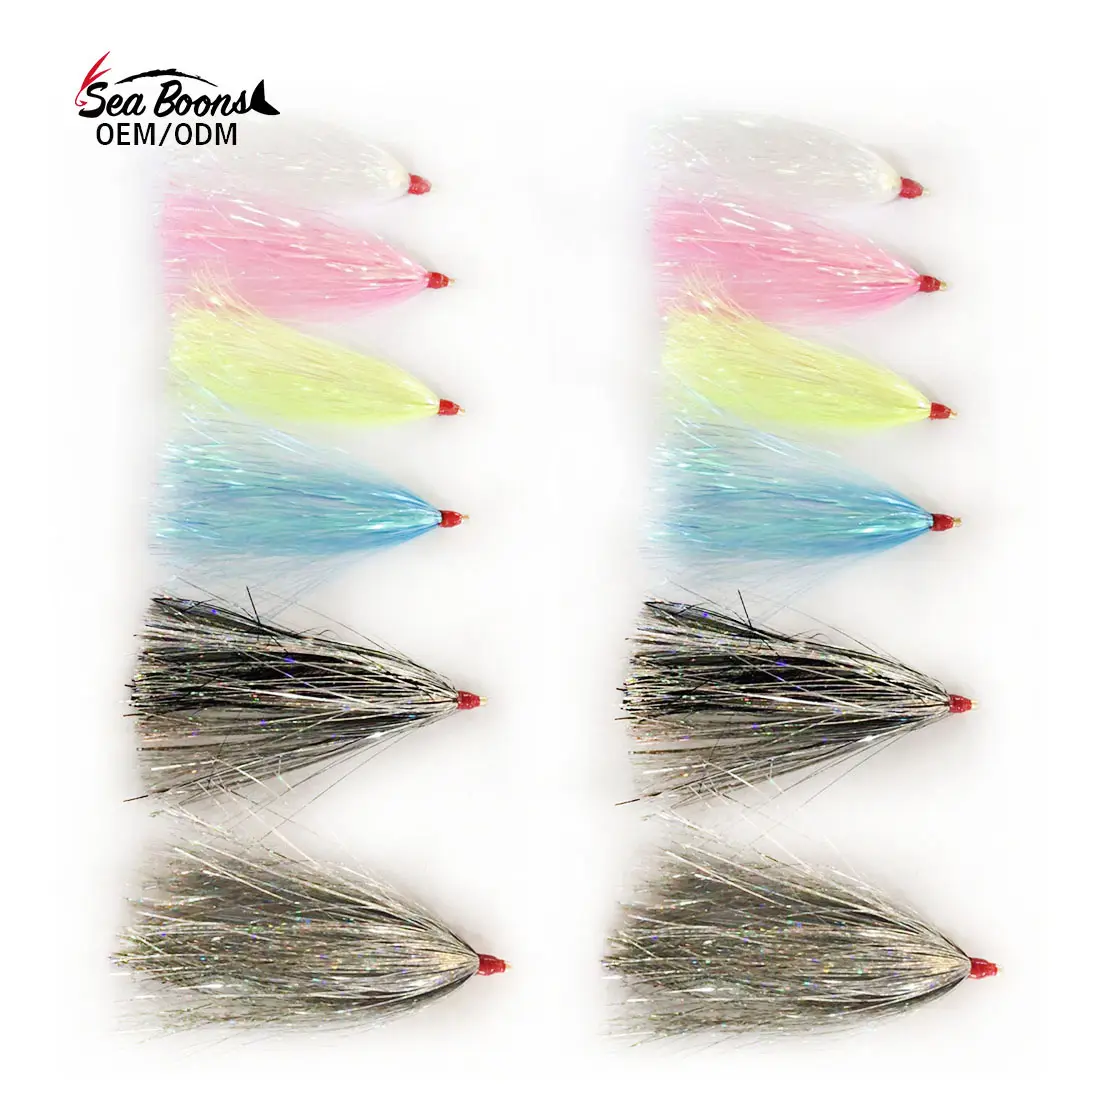 8 cm10cm Mylar Flash Teaser tonno Jig Fishing Lure Fly Bait Bucktail Bright Tinsel Fly leging materiale per Bass Rig Fishing